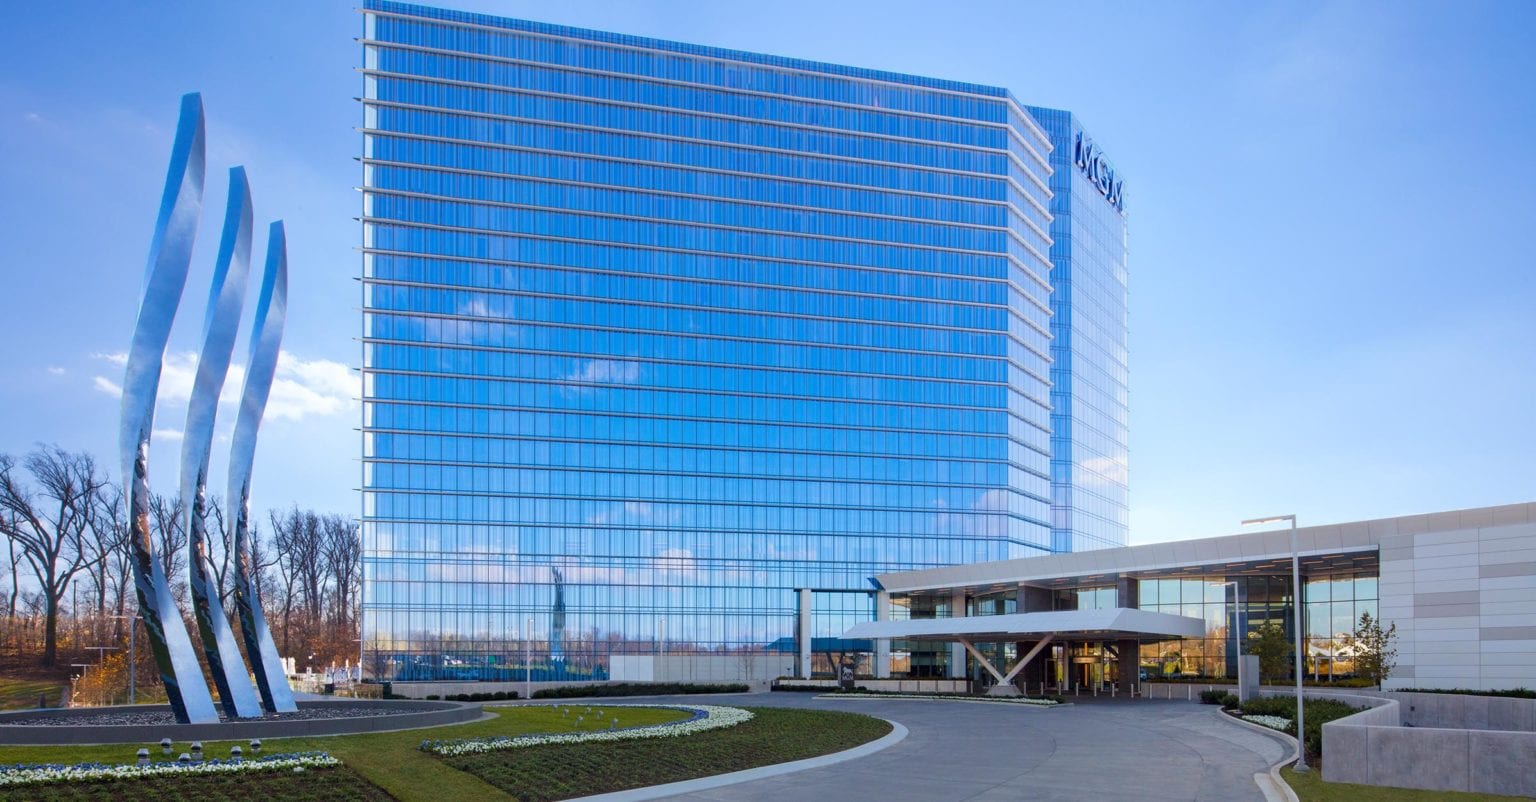 mgm national harbor casino reopen